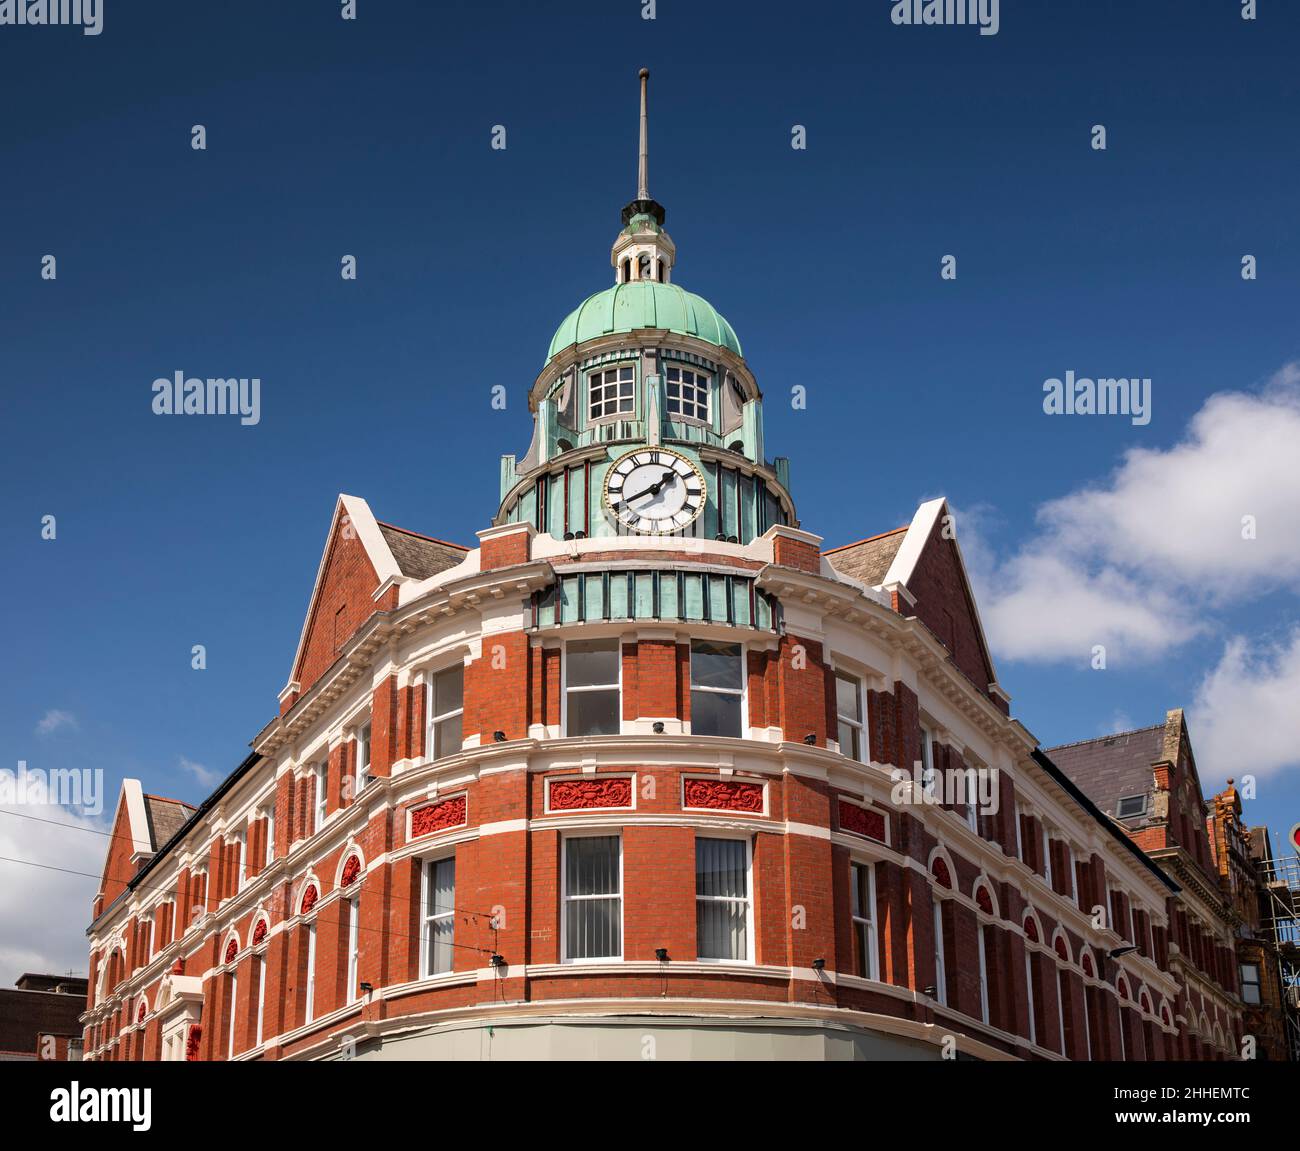 UK, Wales, Merthyr Tydfil, High Street, domed clock tower of curved shop building Stock Photo